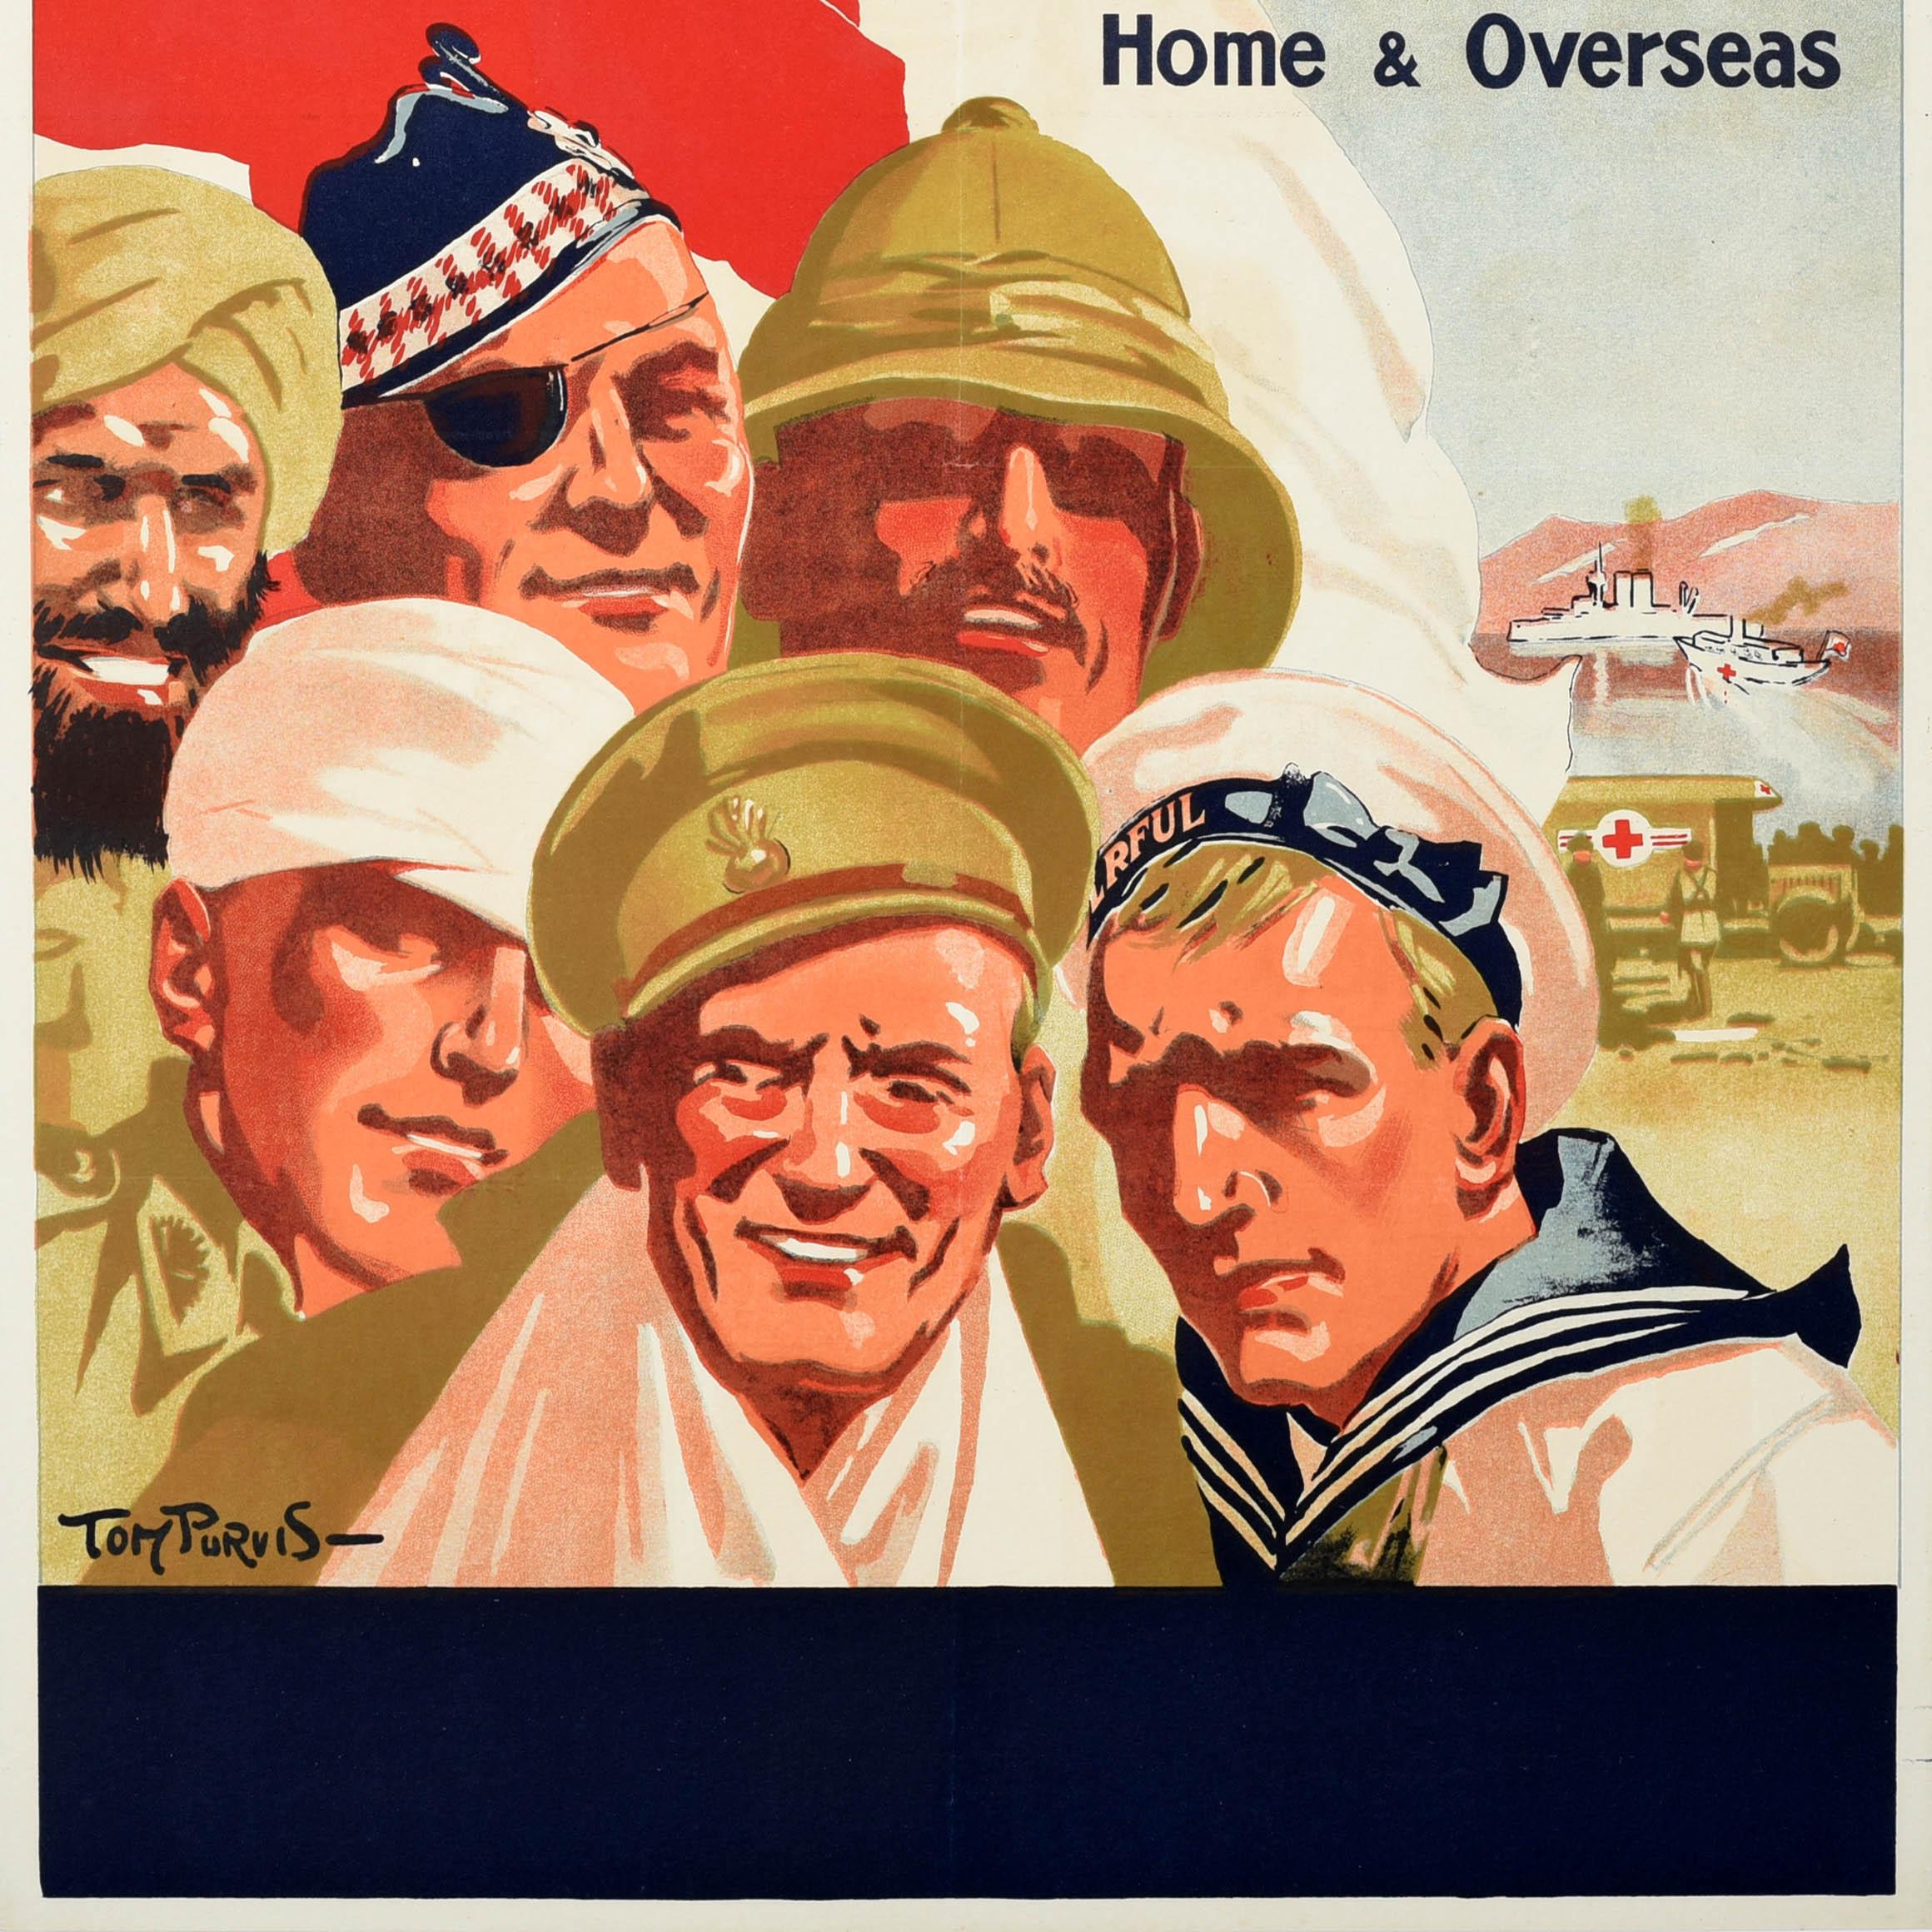 Original antique World War One poster - Our Day To Help at the Front our wounded from Home & Overseas - issued by The British Red Cross Society & Order of St John for an event on 21 October 1915. Great artwork by Tom Purvis (1888-1959) showing a